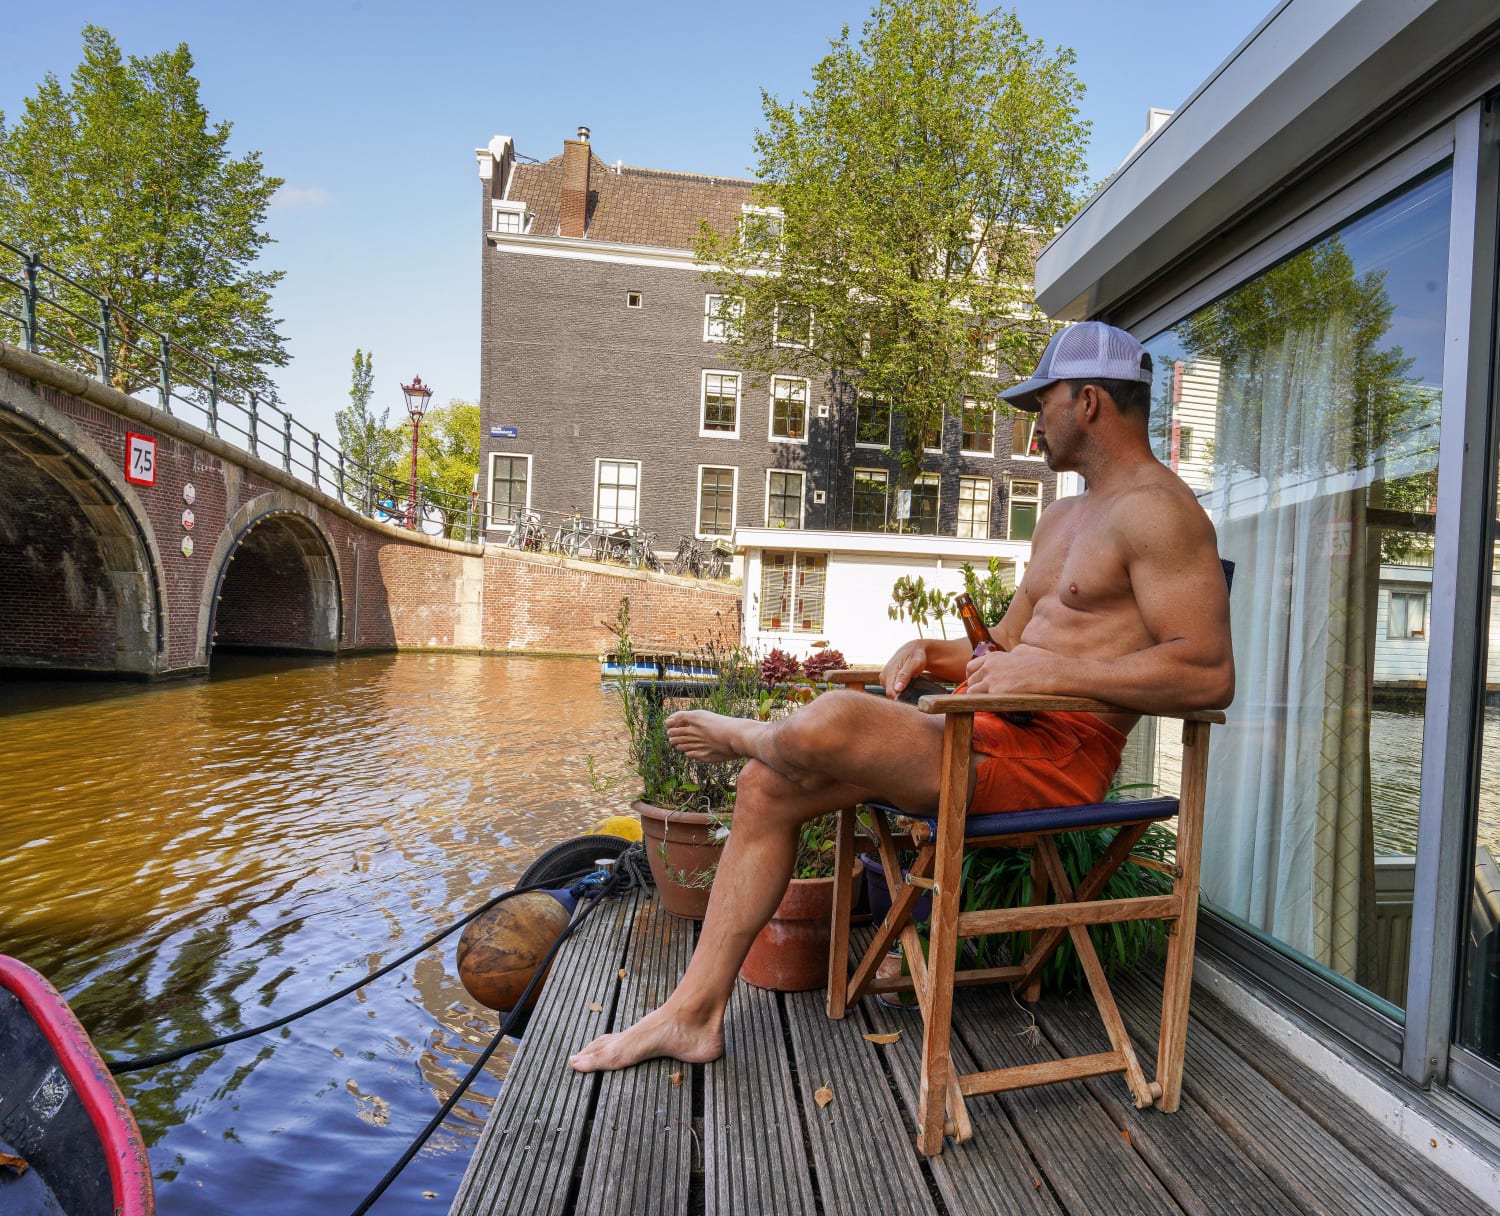 Got to enjoy one of my life long dreams - enjoy a beer on a houseboat in the canals of Amsterdam.